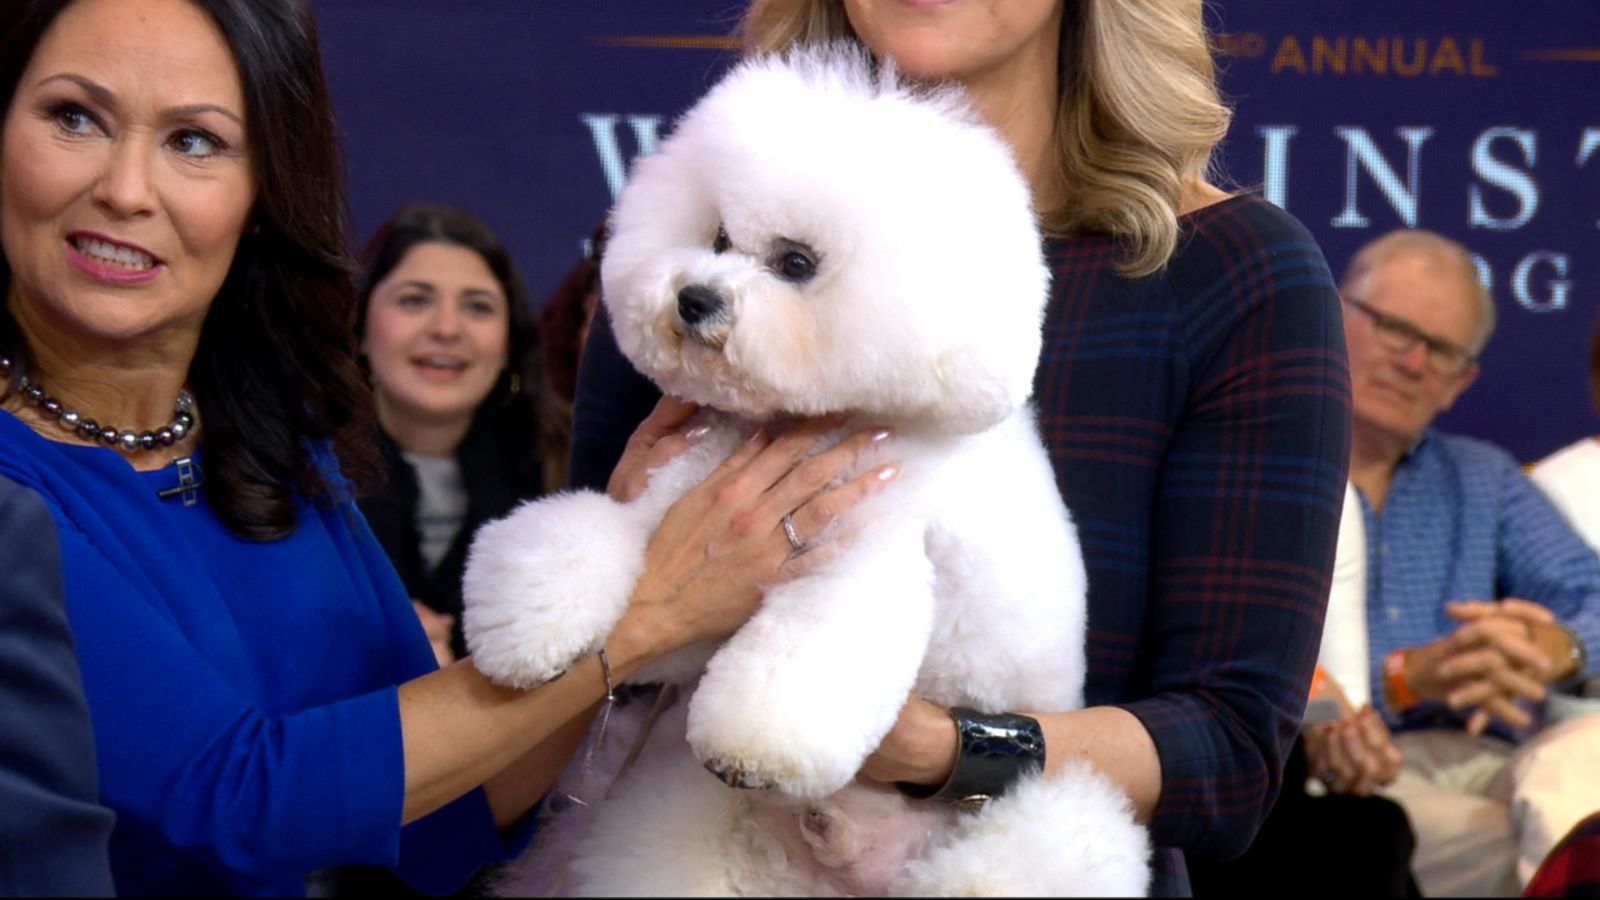 Meet the 'Best in Show' Westminster dog Good Morning America